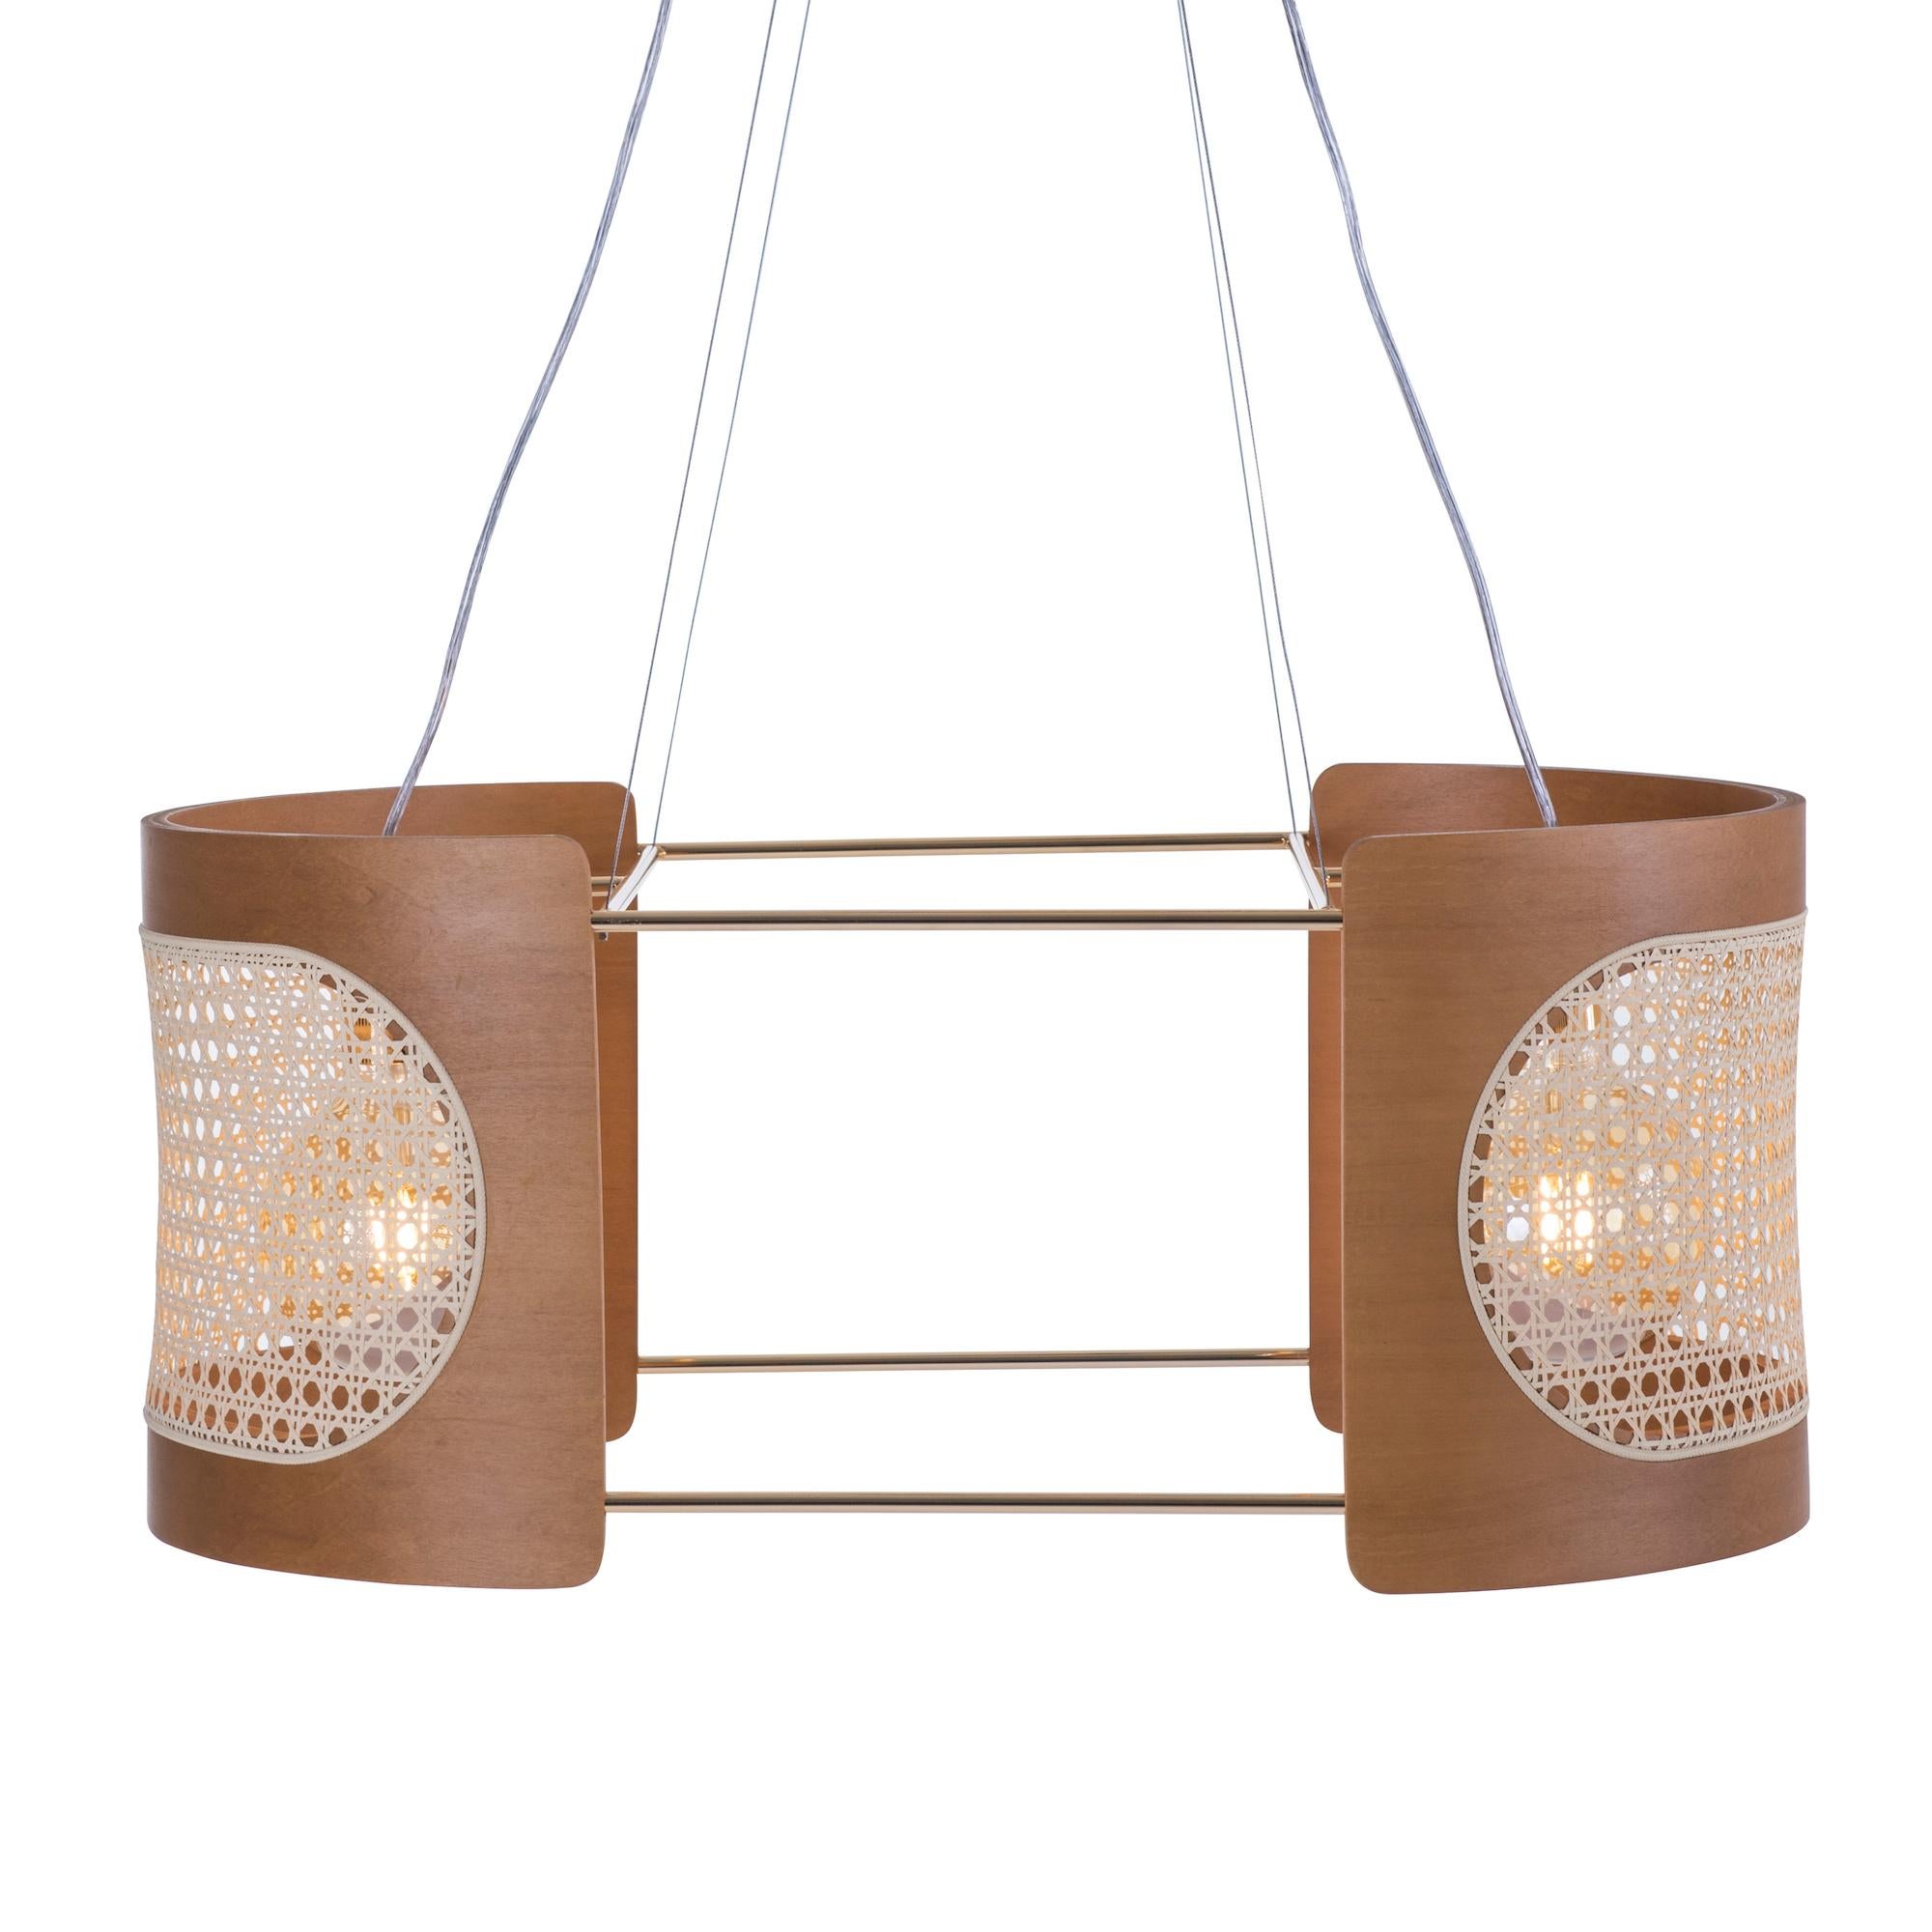 Hand-Crafted Contemporary Pendant Lamp Noce Small Size, Brazilian Wood and Natural Straw For Sale